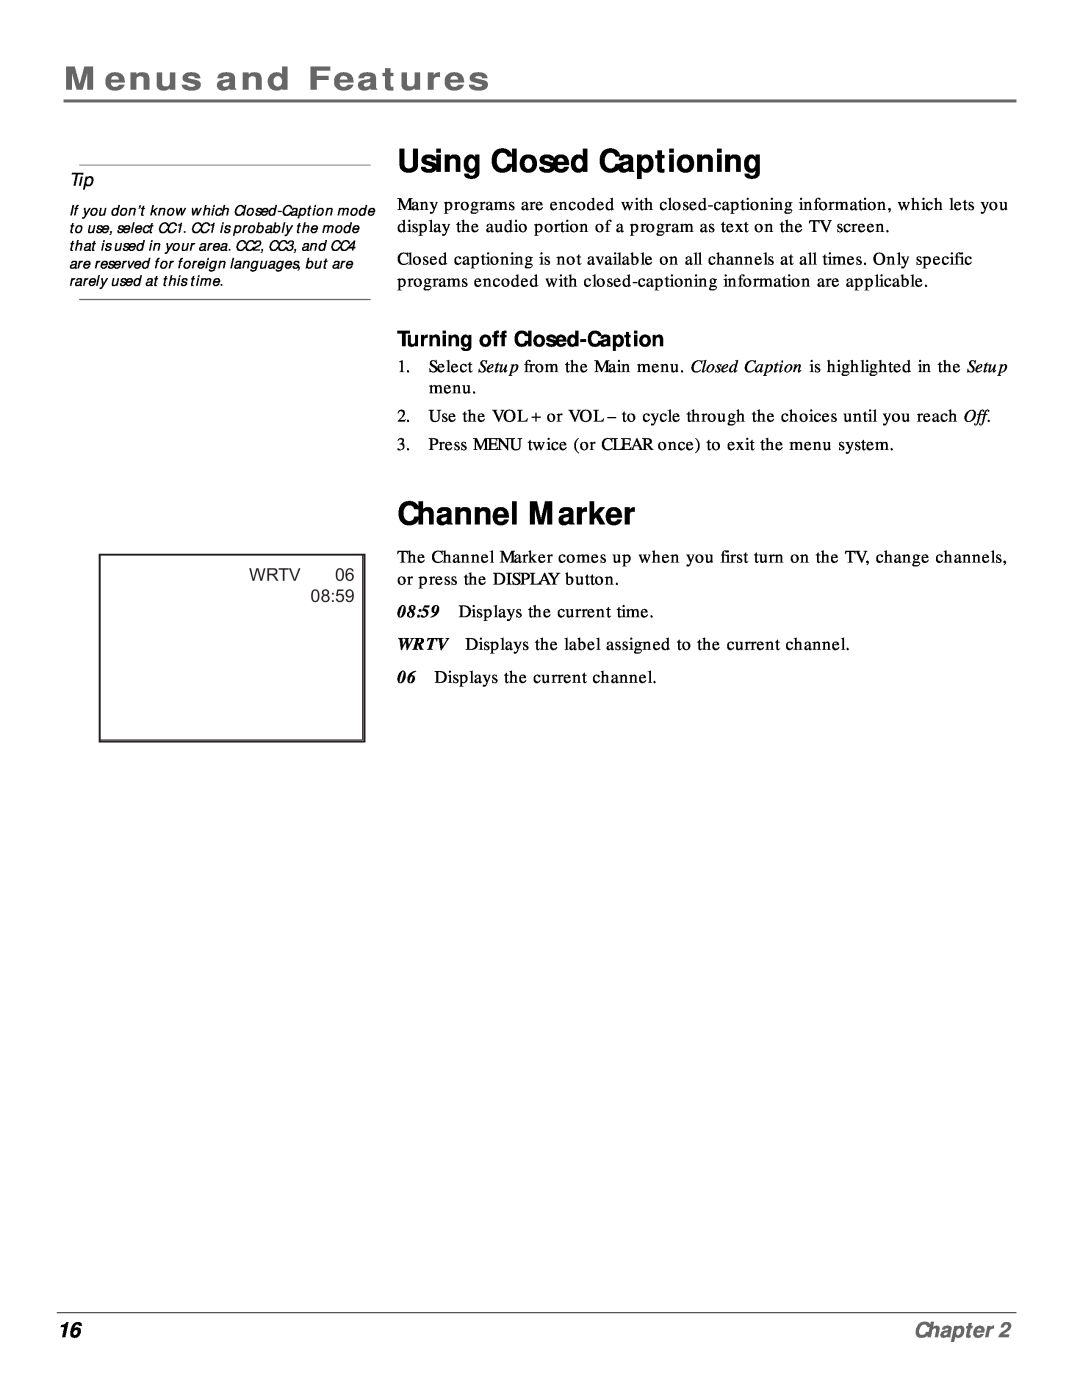 RCA CR20310 manual Using Closed Captioning, Channel Marker, Turning off Closed-Caption, Menus and Features, Chapter 